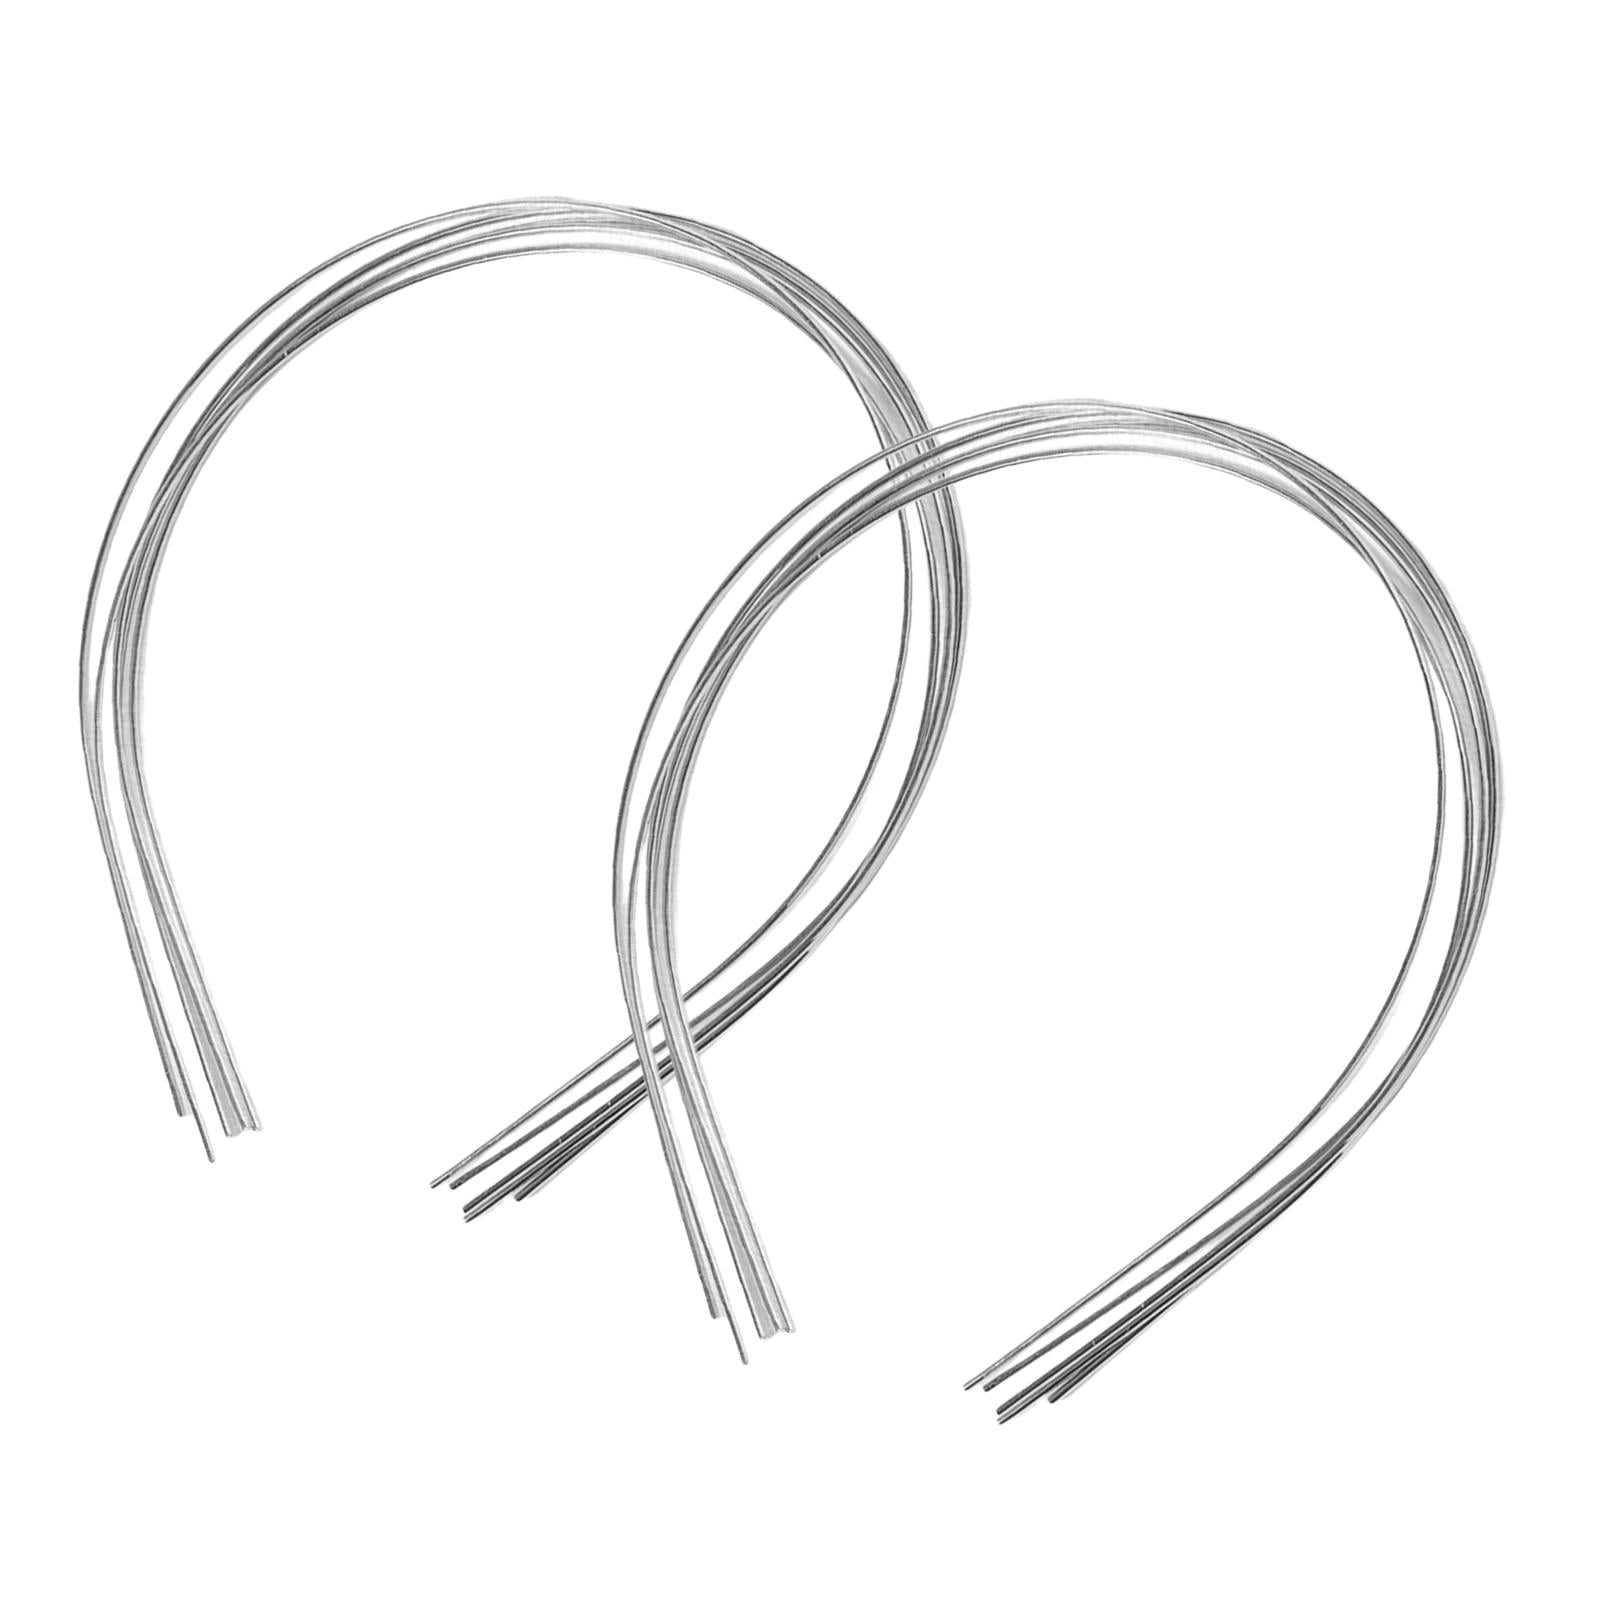 10 Pieces 1.5mm Metal Thin Wire Headband Plain Stainless Steel Hair Band  Skinny